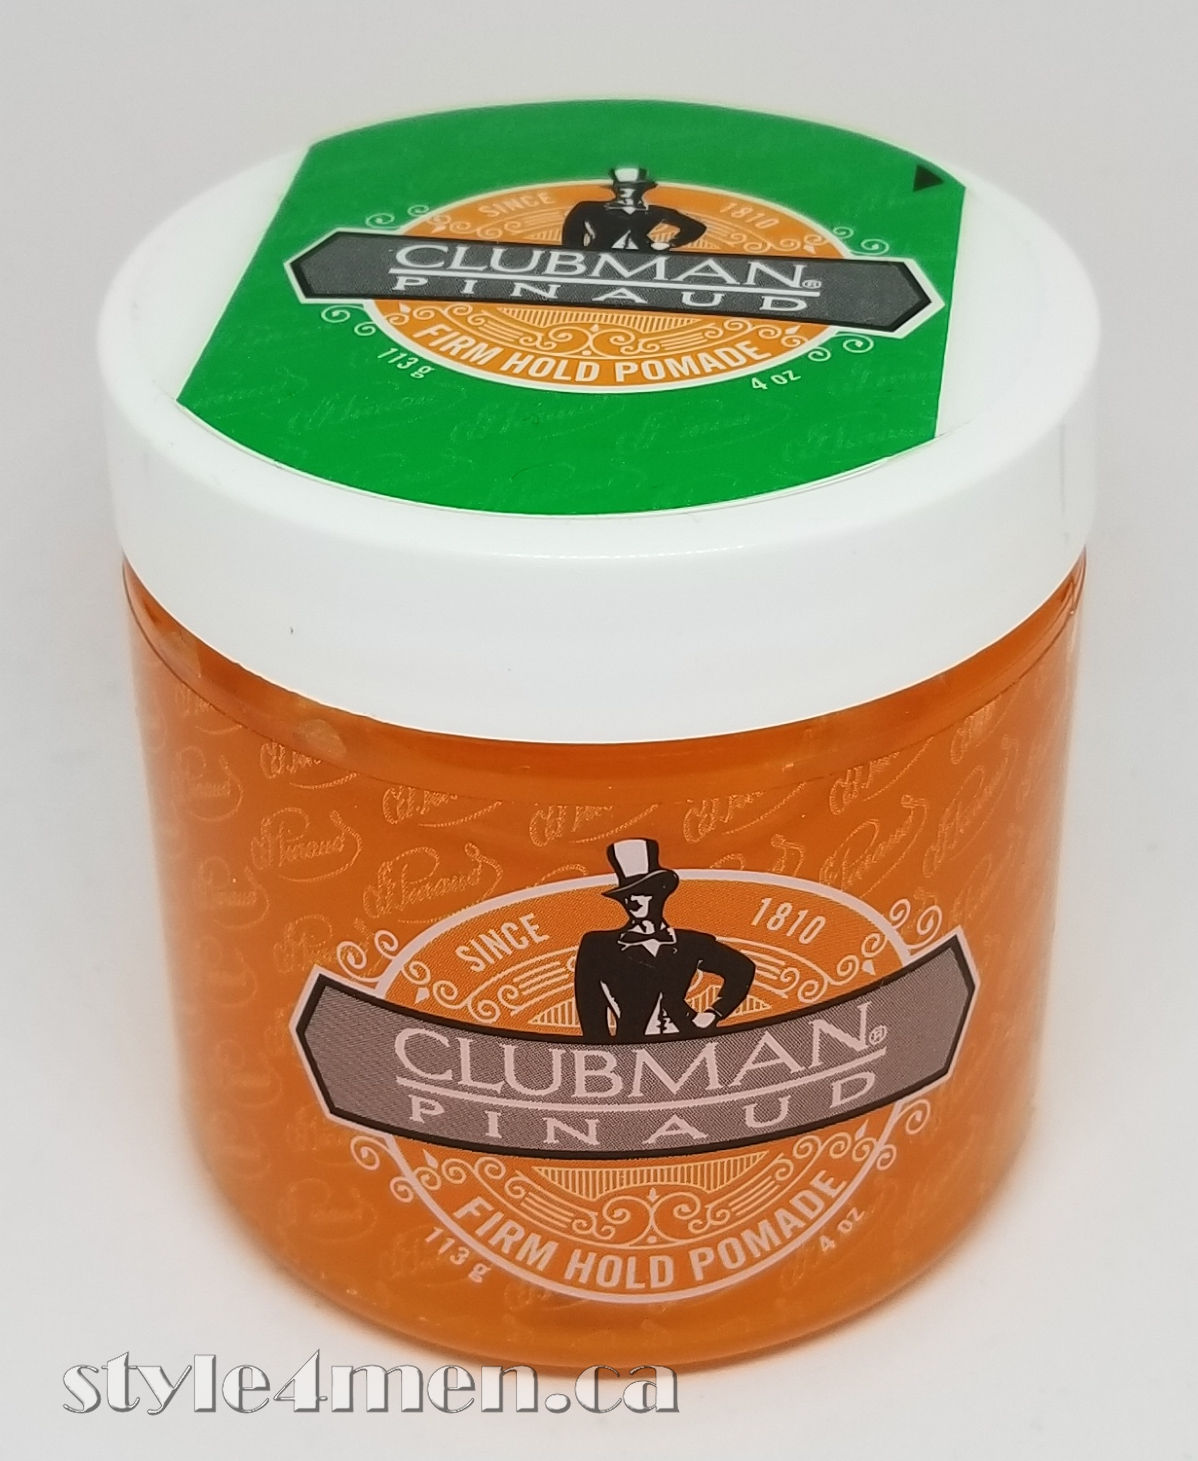 Clubman-Pinaud Firm Hold Pomade